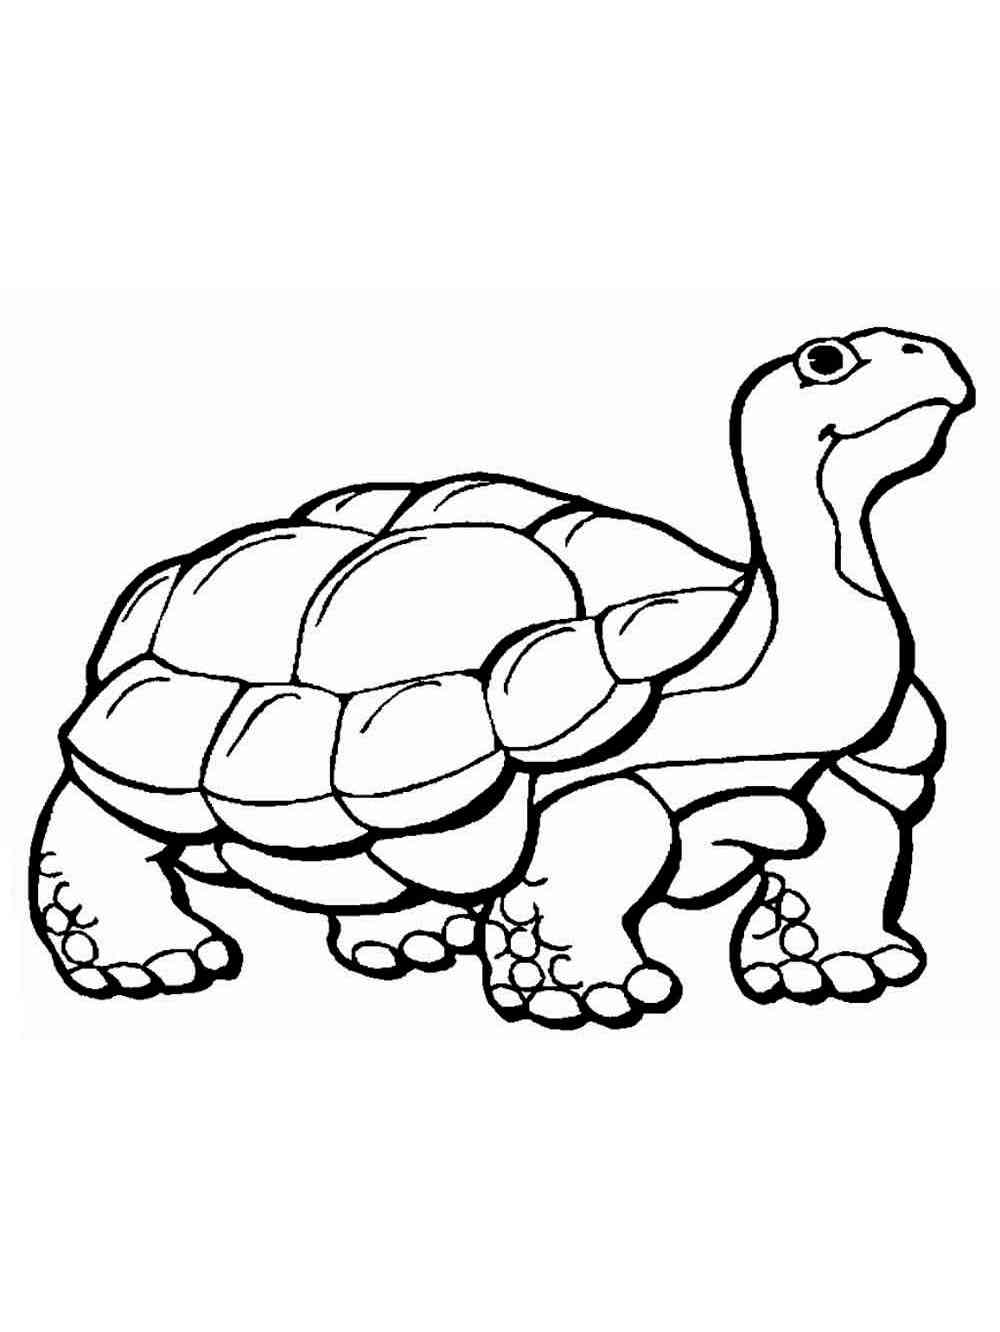 Galapagos Tortoise coloring page